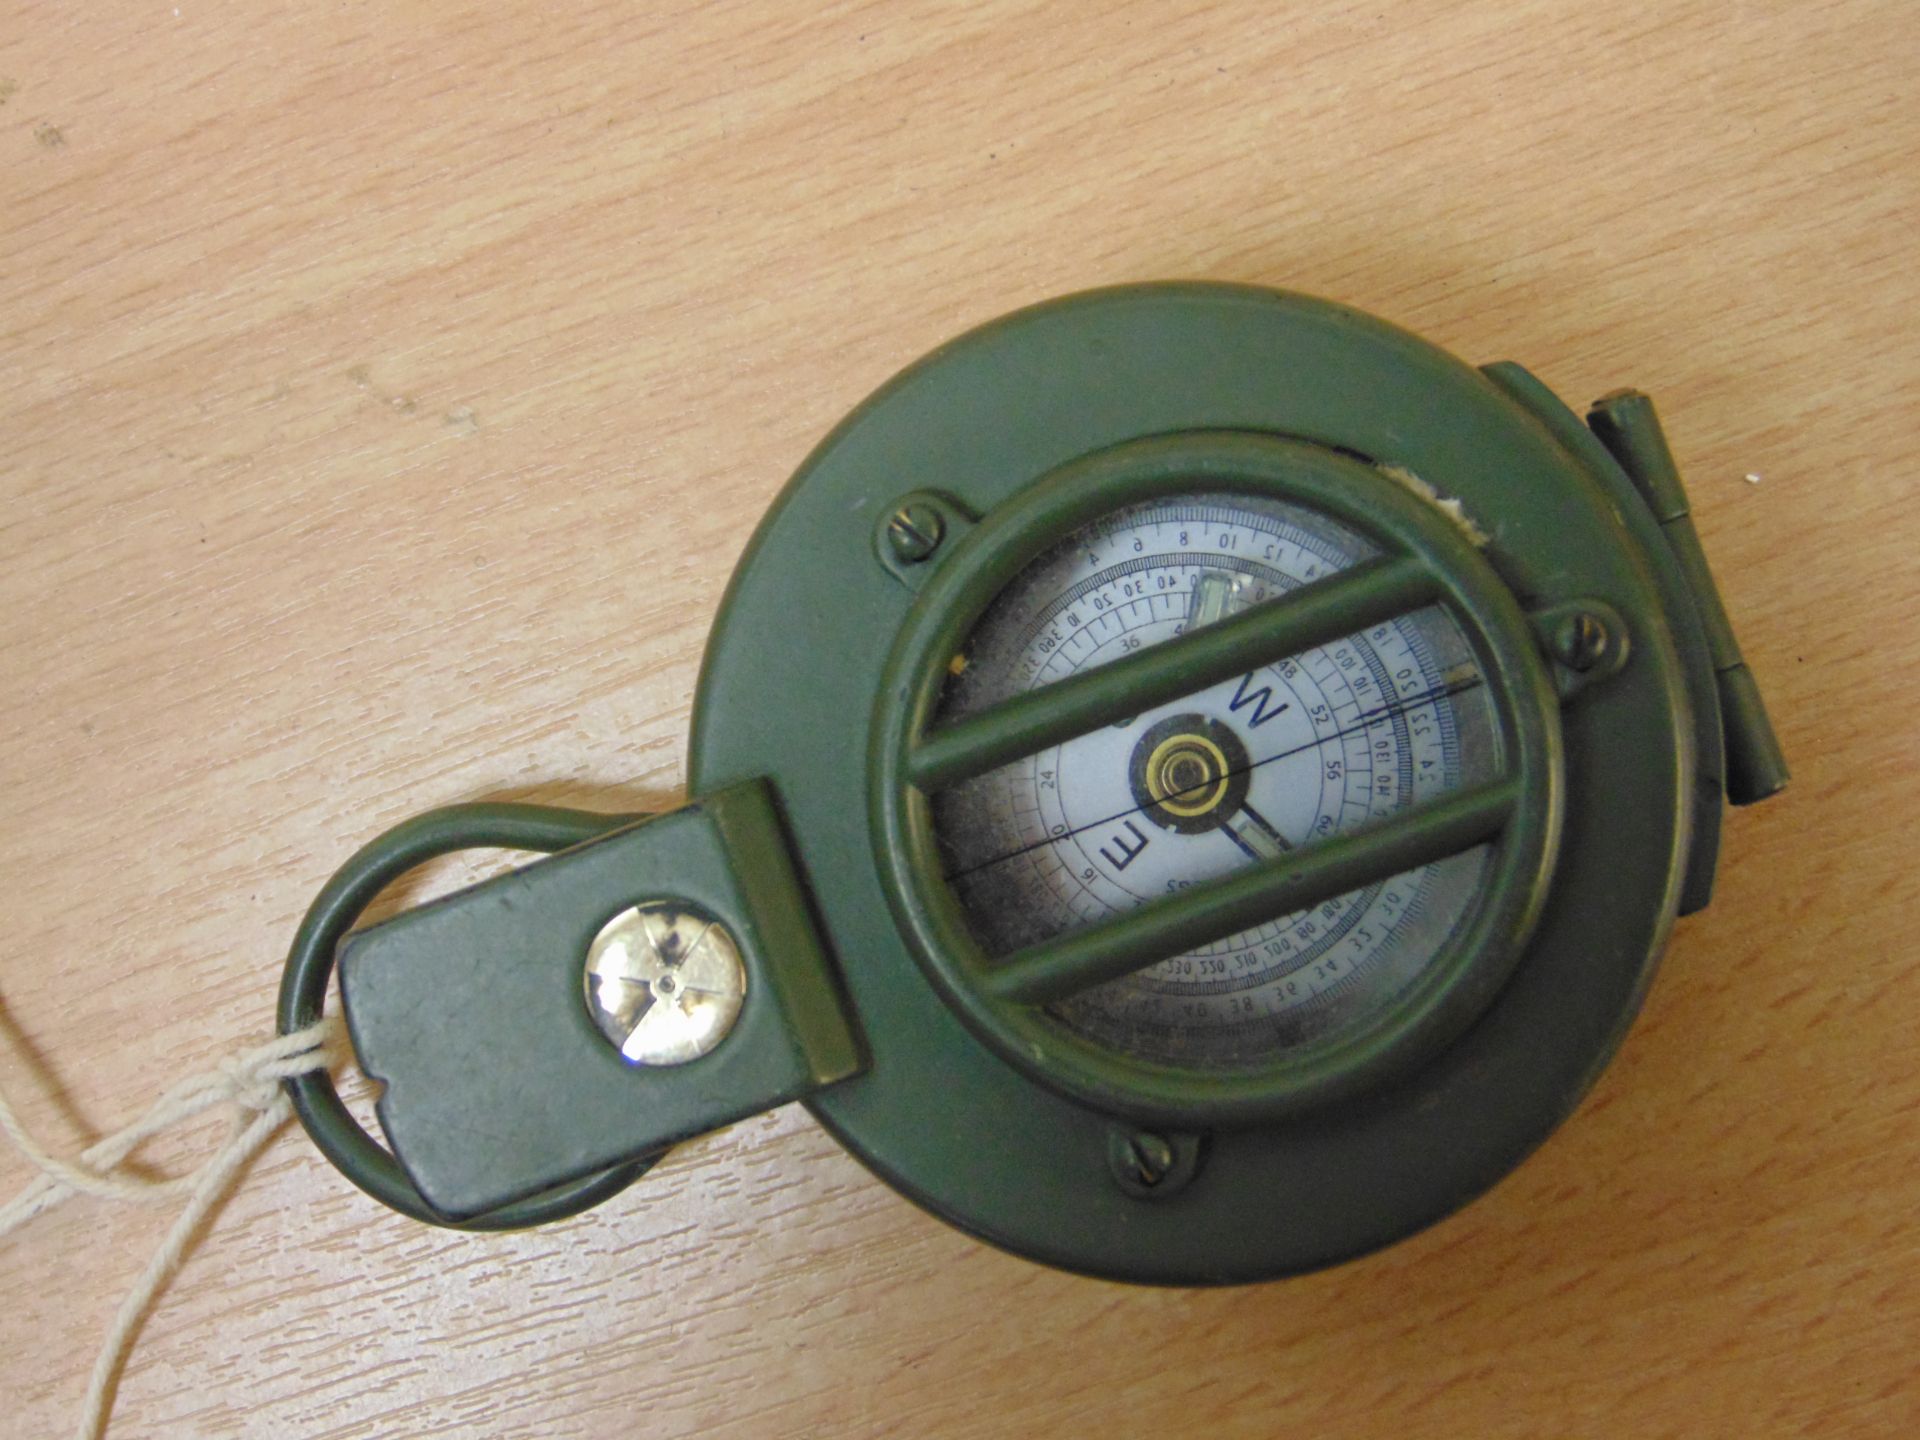 FRANCIS BARKER M88 PRISMATIC COMPASS NATO MARKS BRITISH ARMY ISSUED